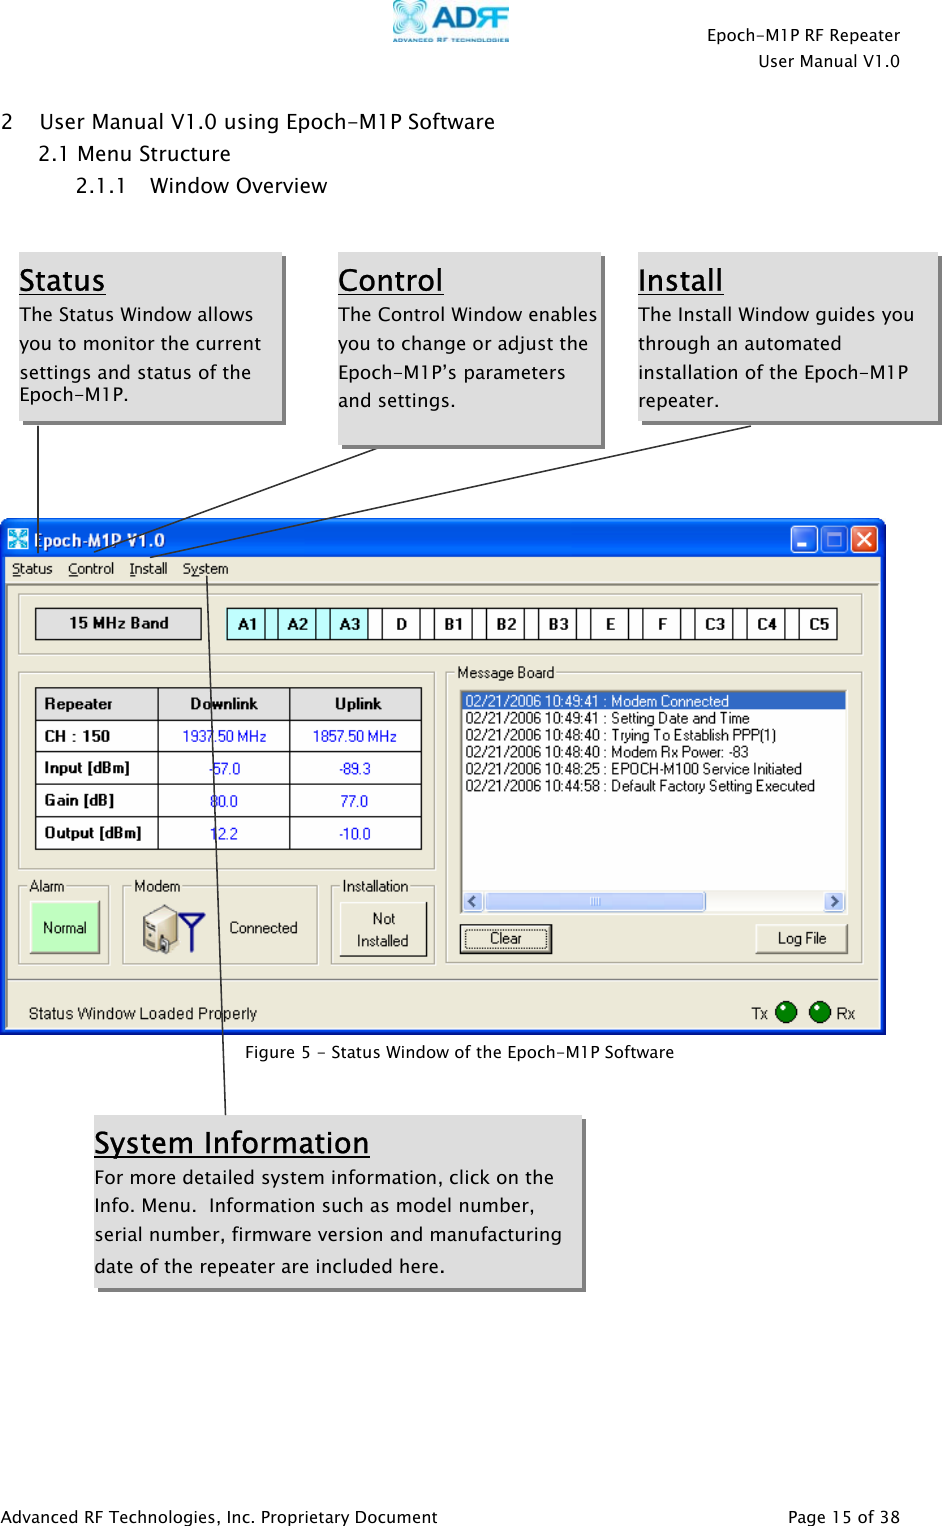    Epoch-M1P RF Repeater  User Manual V1.0  2 User Manual V1.0 using Epoch-M1P Software  2.1 Menu Structure 2.1.1 Window Overview            Status The Status Window allows you to monitor the current settings and status of the Epoch-M1P.  Control The Control Window enablesyou to change or adjust the Epoch-M1P’s parameters and settings.  Install The Install Window guides you through an automated installation of the Epoch-M1P repeater. System Information For more detailed system information, click on the Info. Menu.  Information such as model number, serial number, firmware version and manufacturing date of the repeater are included here.  Figure 5 - Status Window of the Epoch-M1P Software             Advanced RF Technologies, Inc. Proprietary Document   Page 15 of 38  